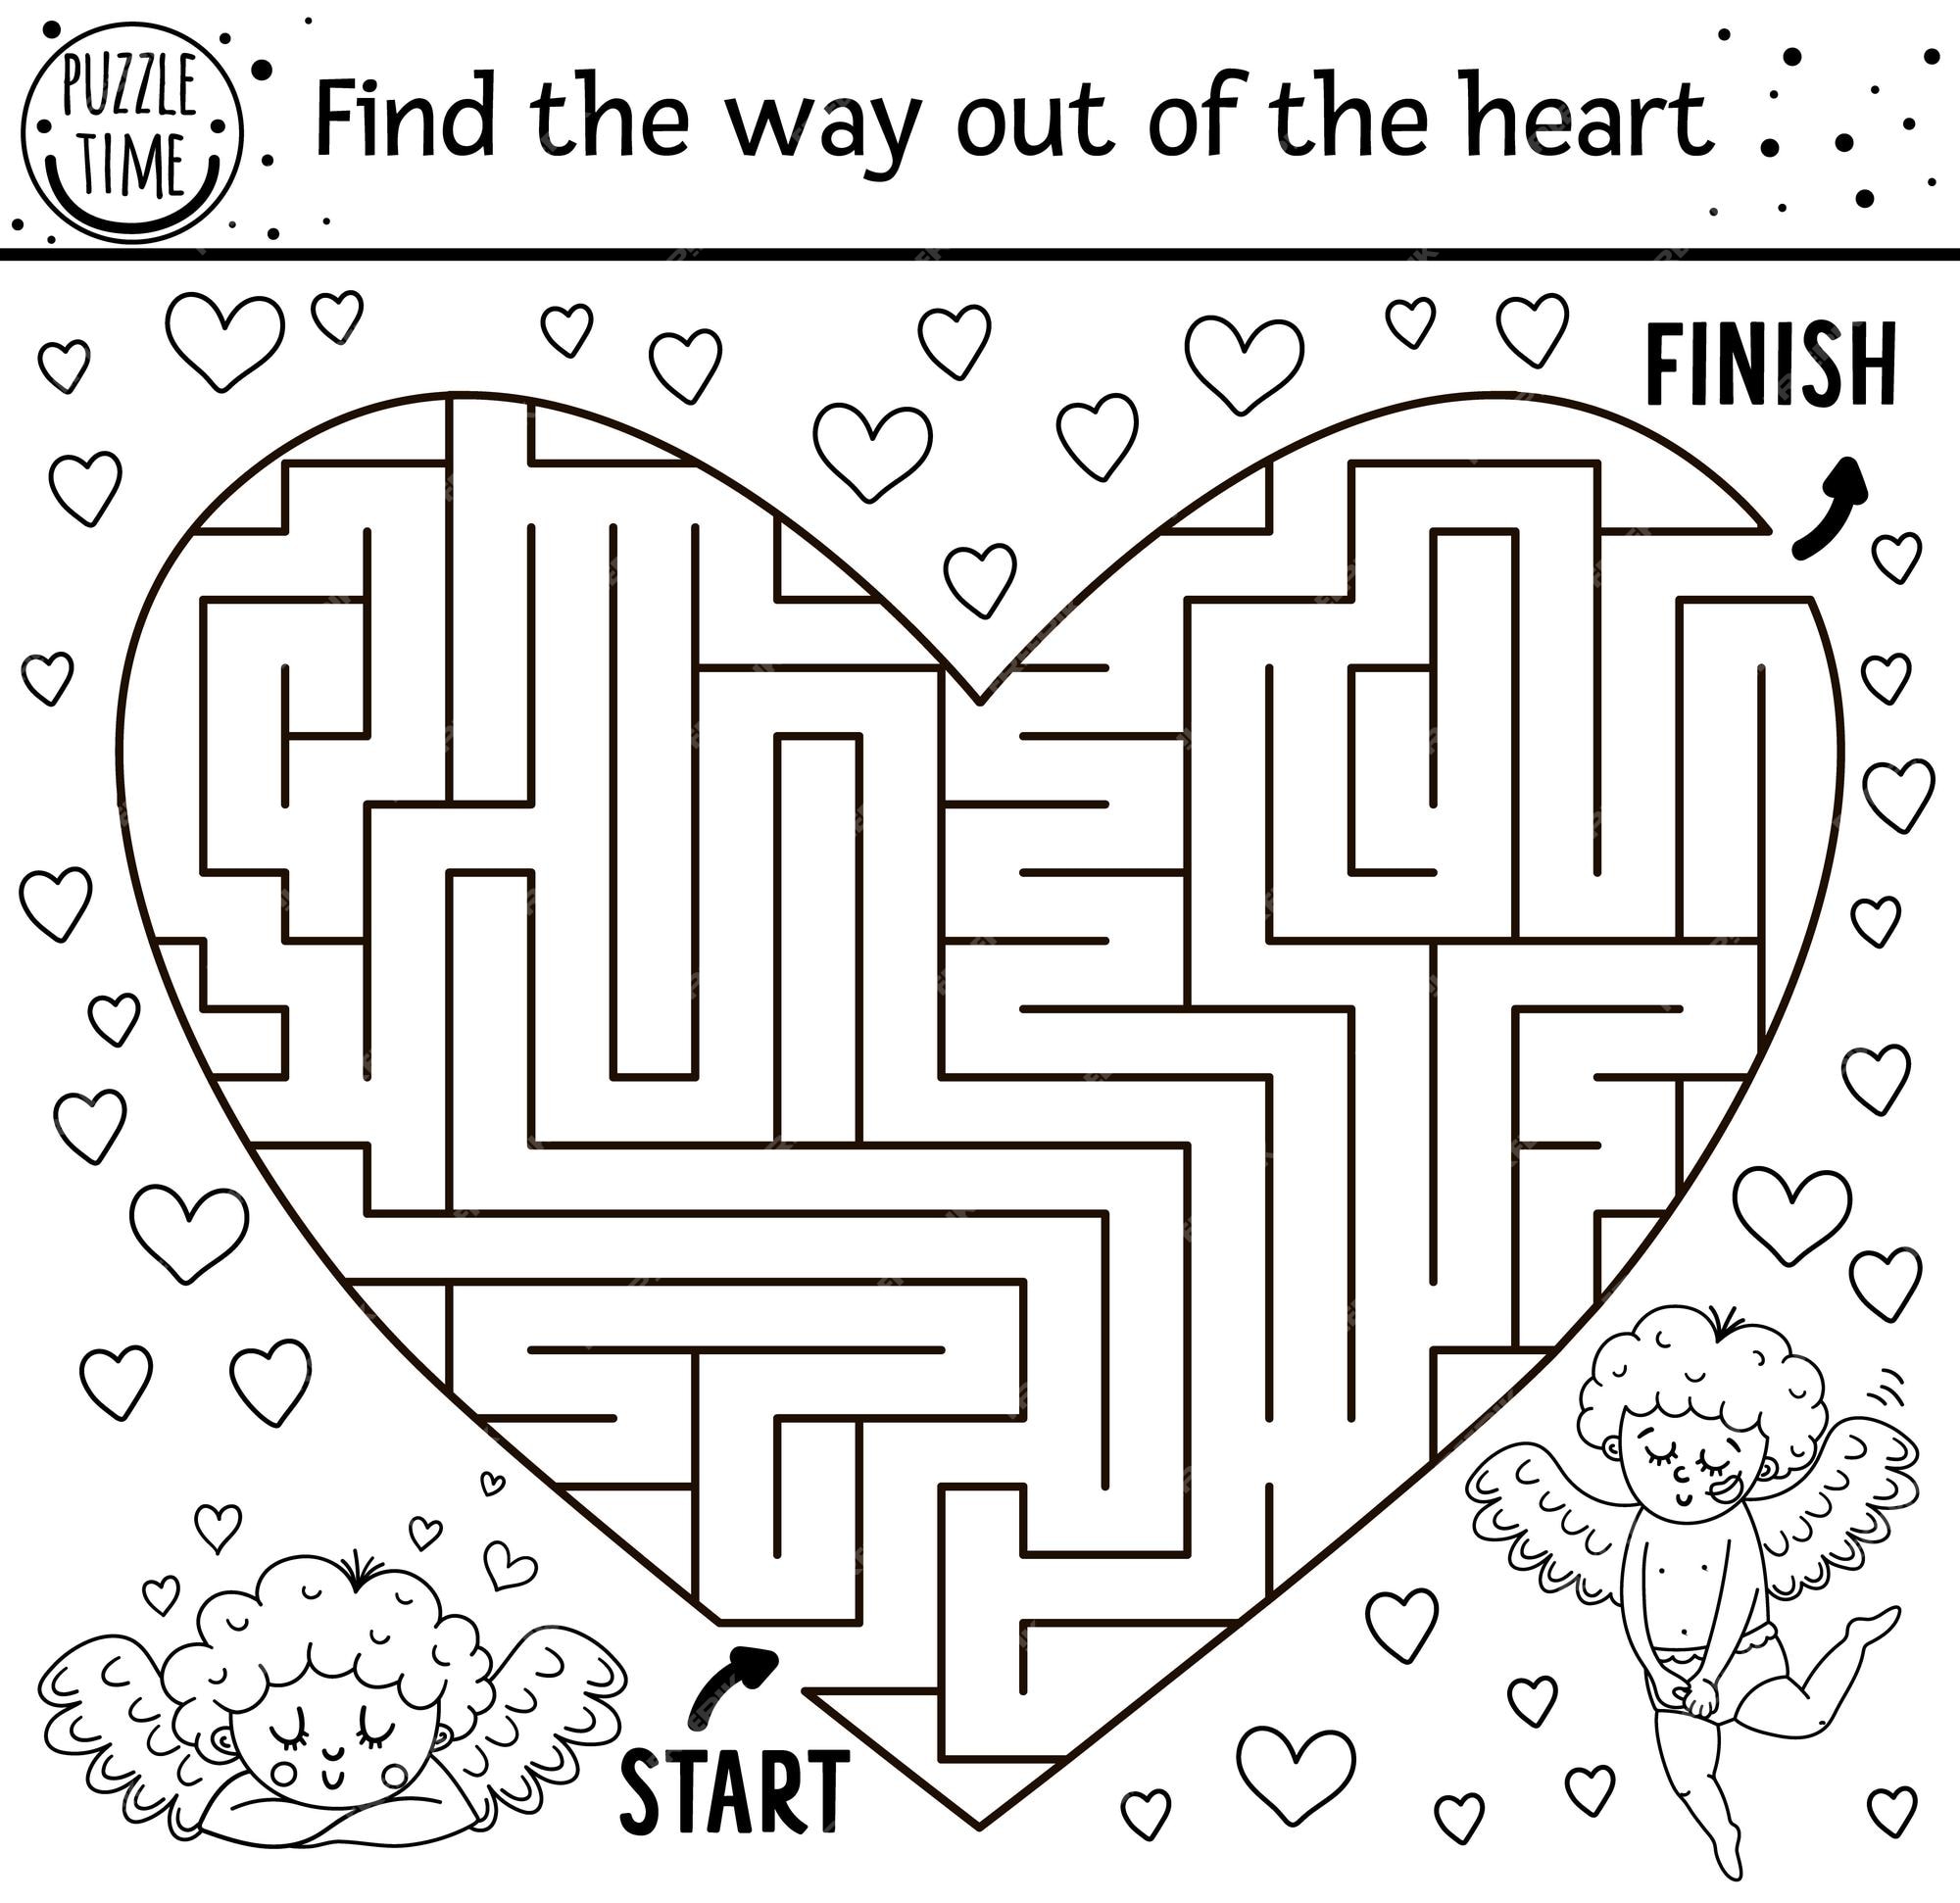 Premium vector saint valentine day black and white maze for children in heart shape holiday preschool printable educational activity funny game or coloring page with cute cupid romantic puzzle with love